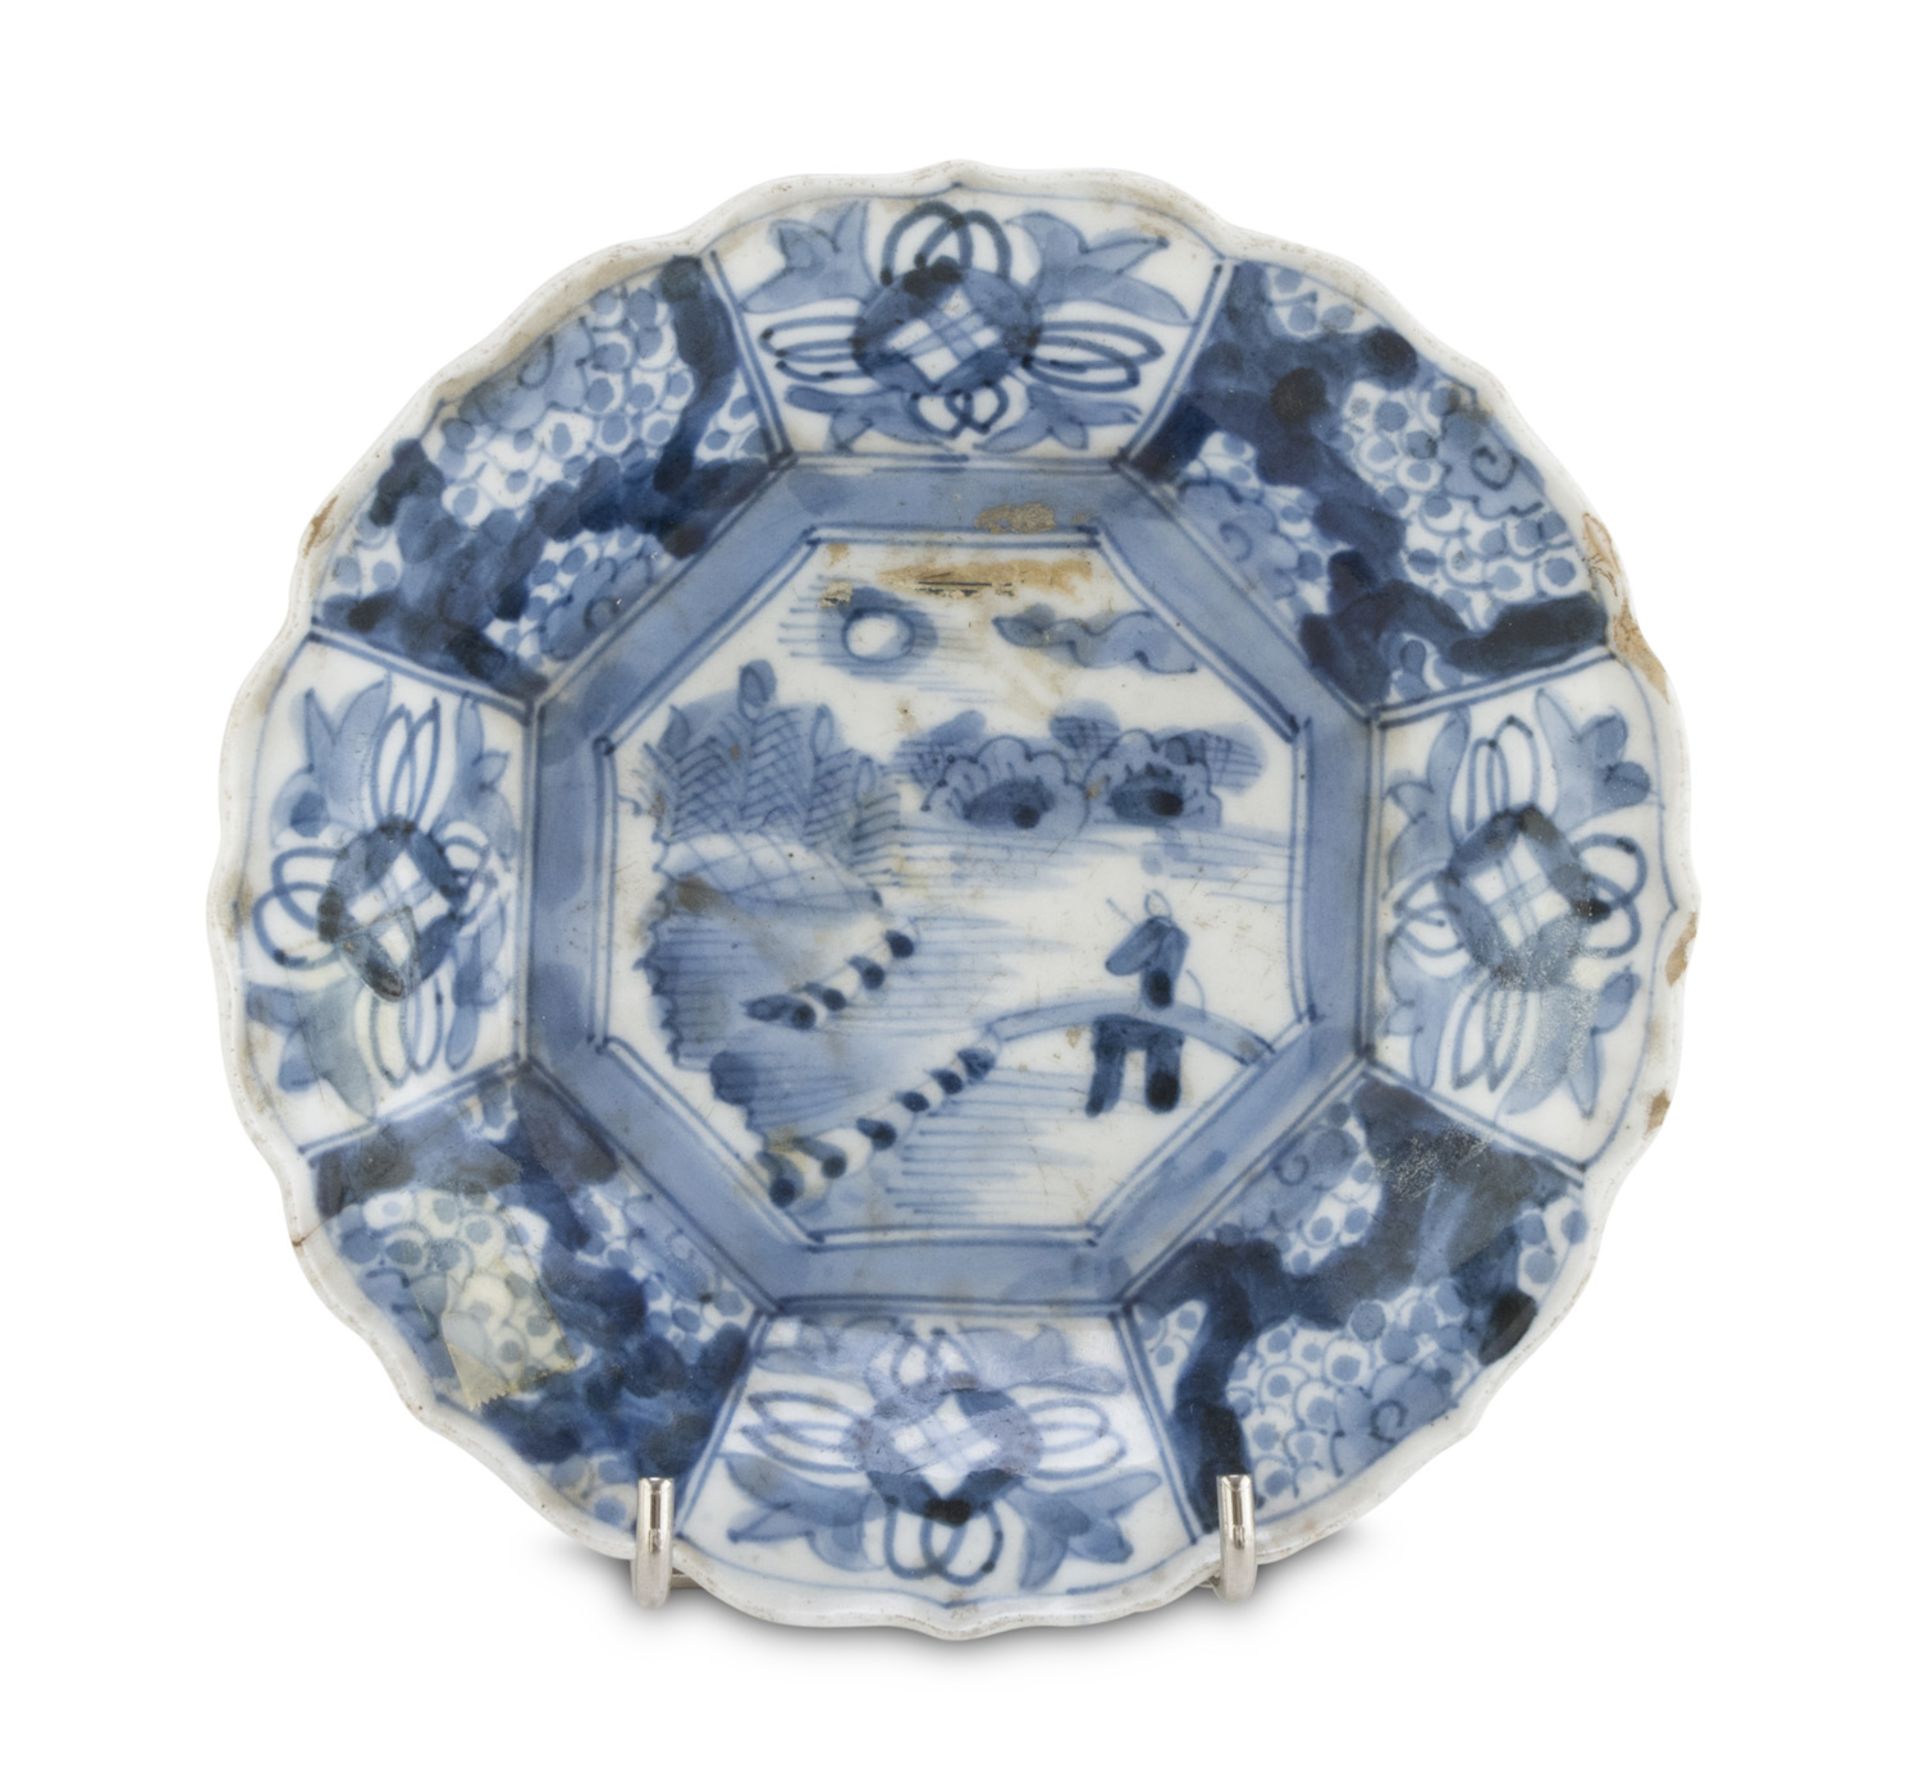 SAUCER IN WHITE AND BLUE PORCELAIN JAPAN 19th CENTURY